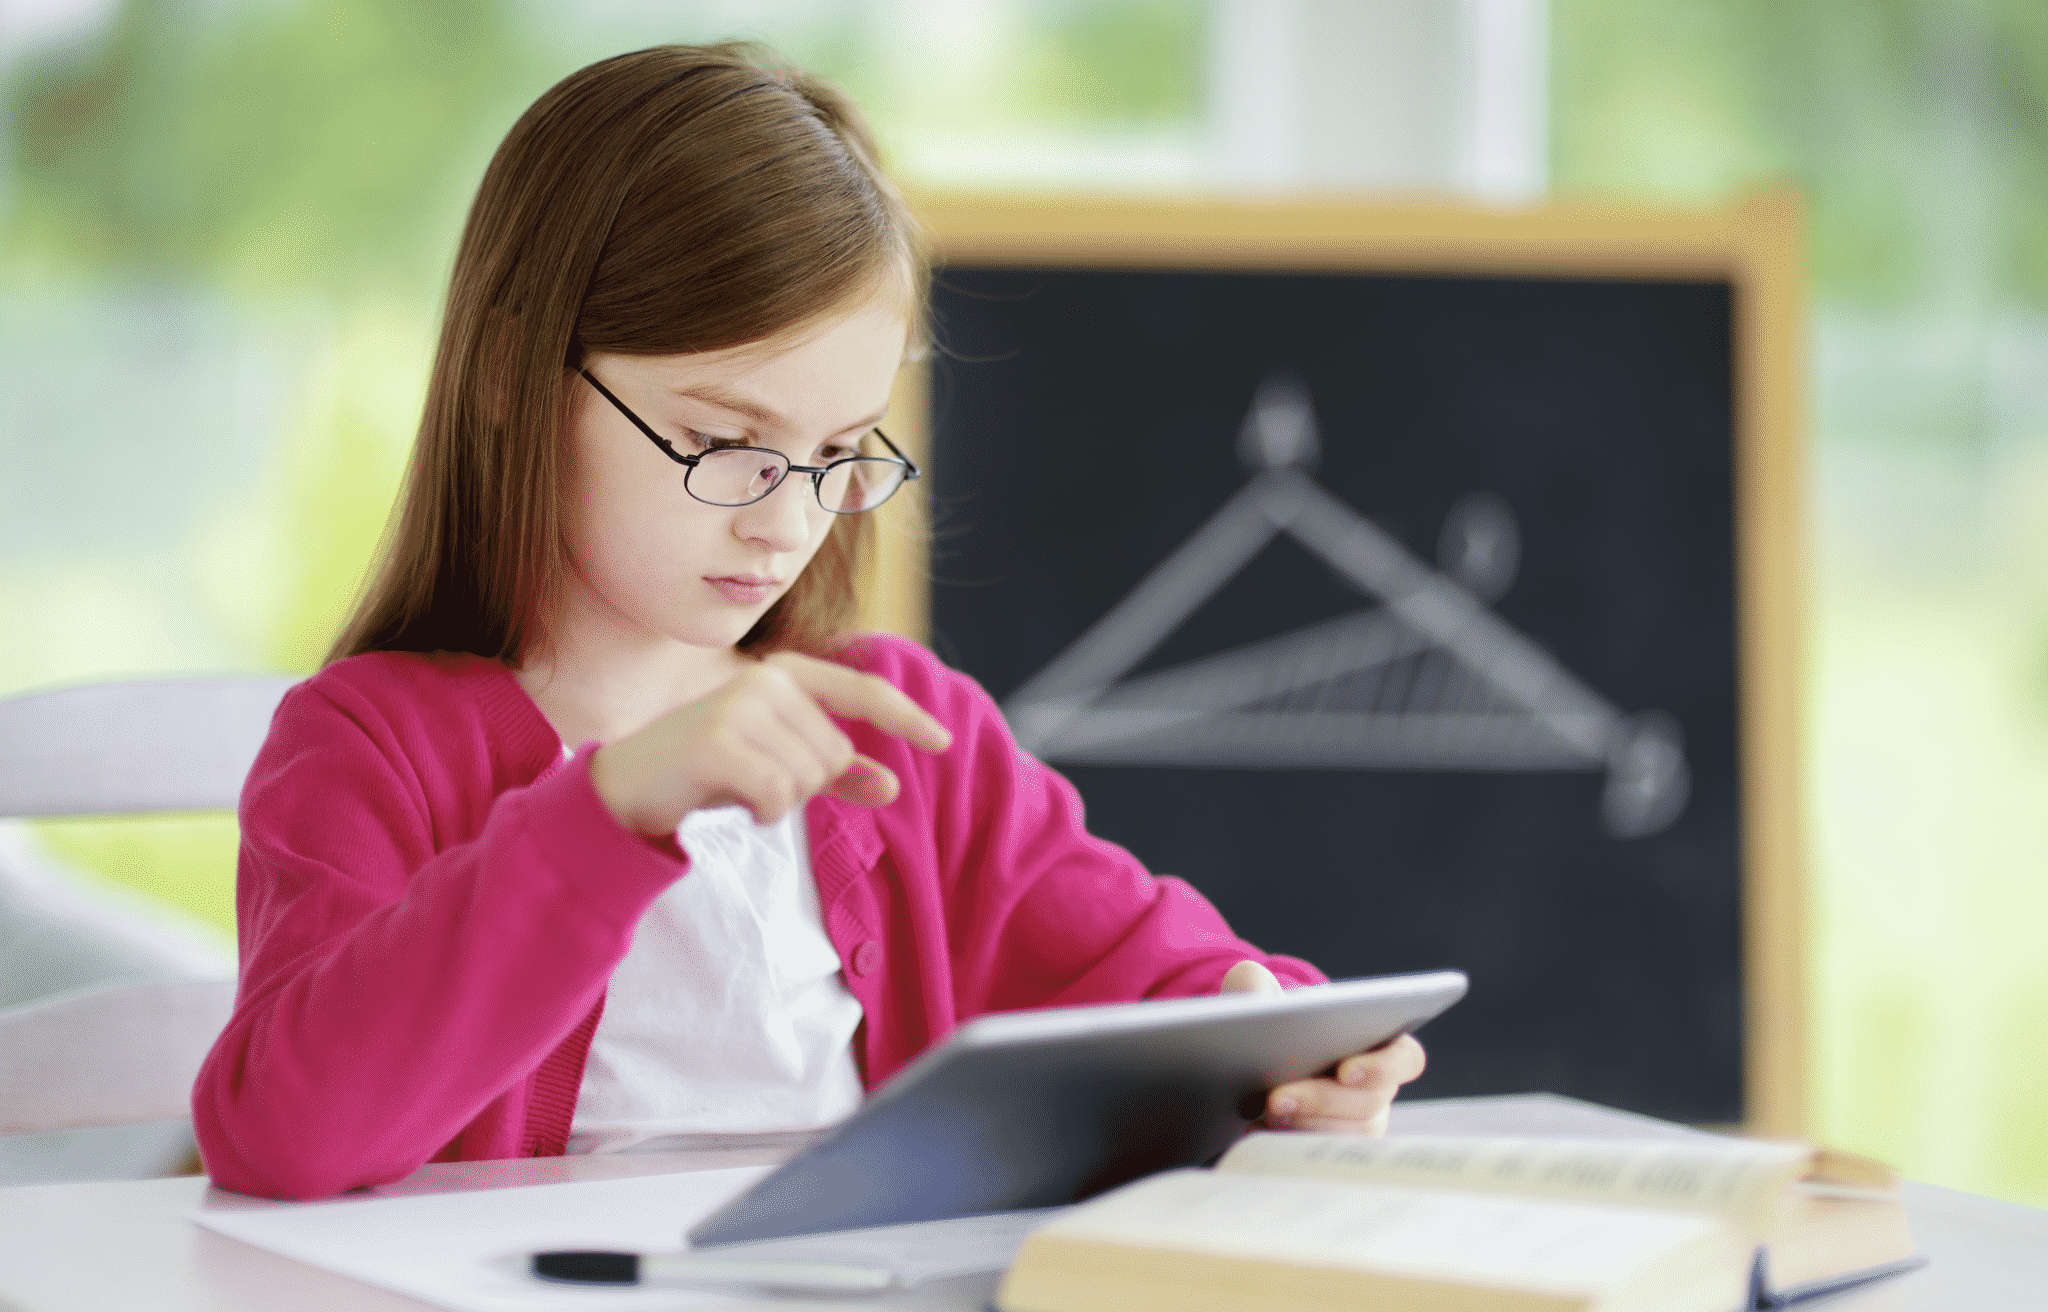 Young girl using a device doing a math problem